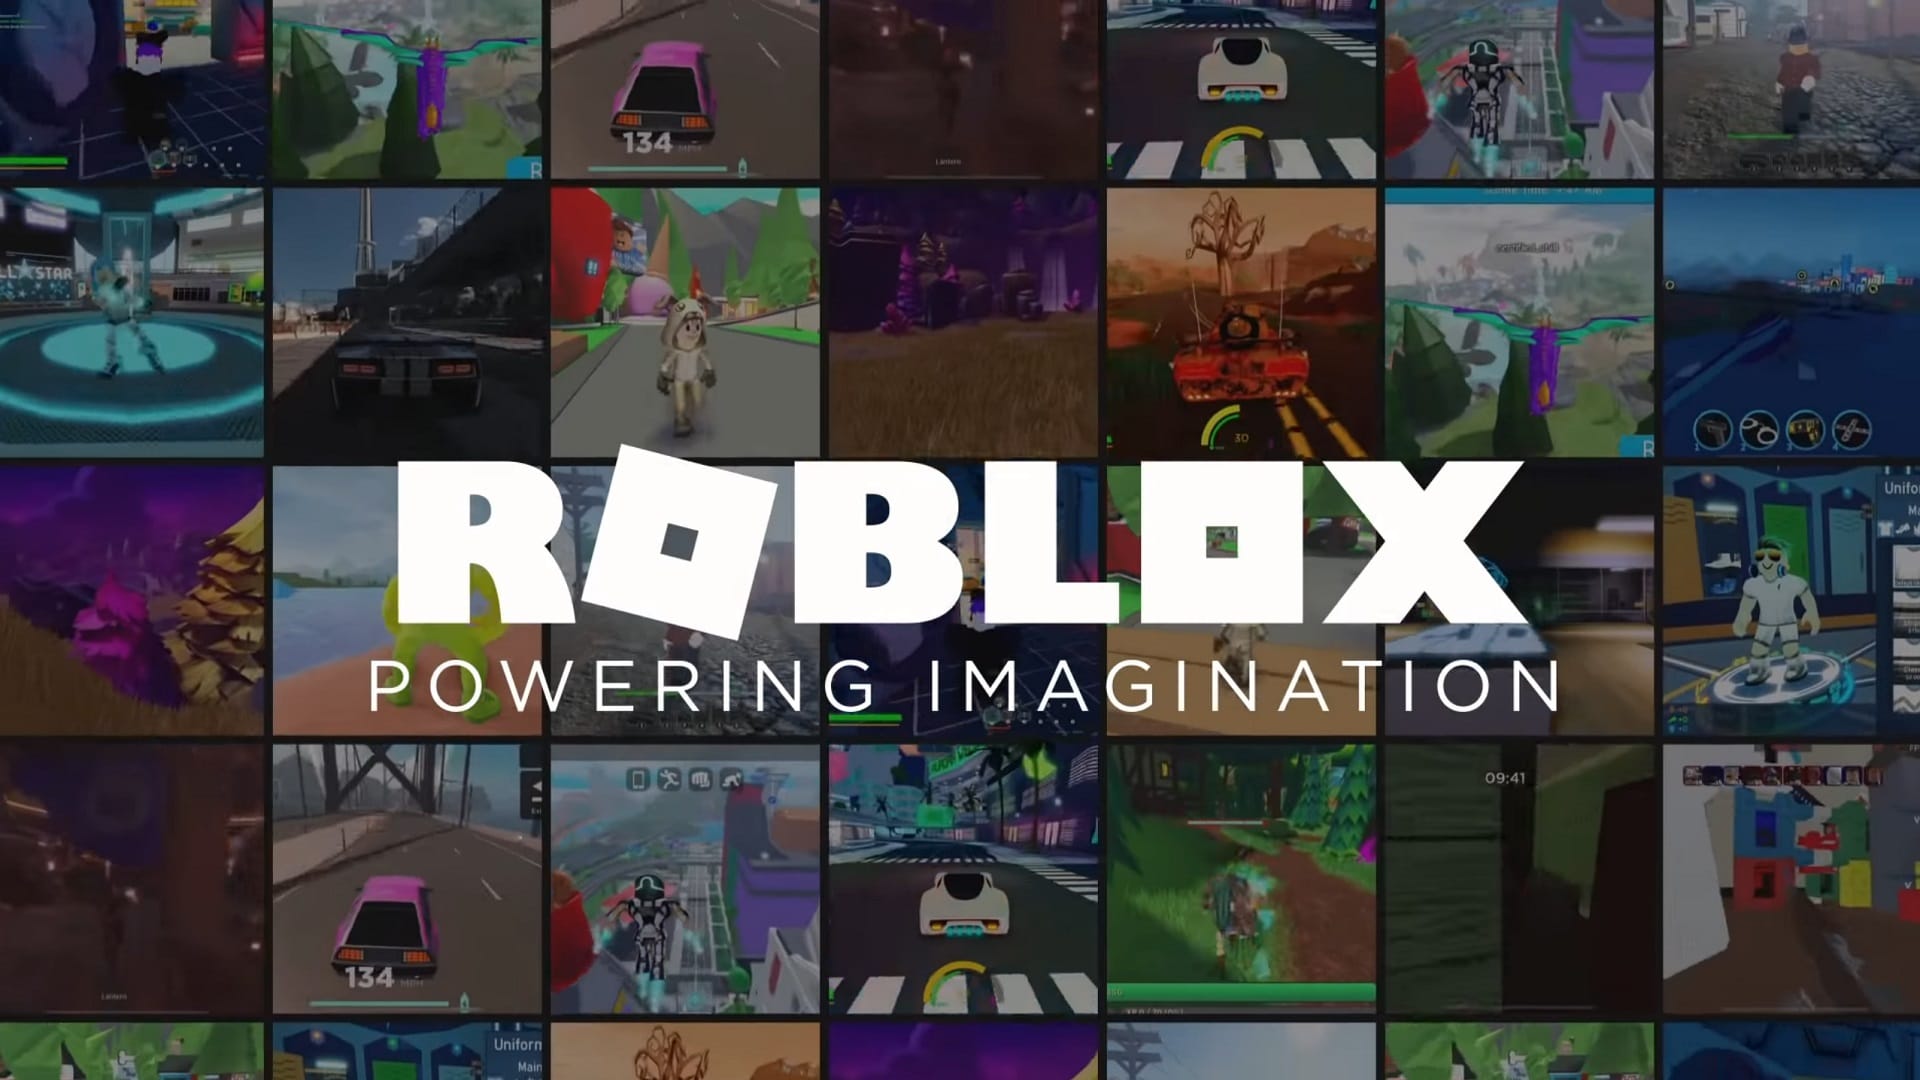 Roblox Valued at $30 billion Going Public without IPO